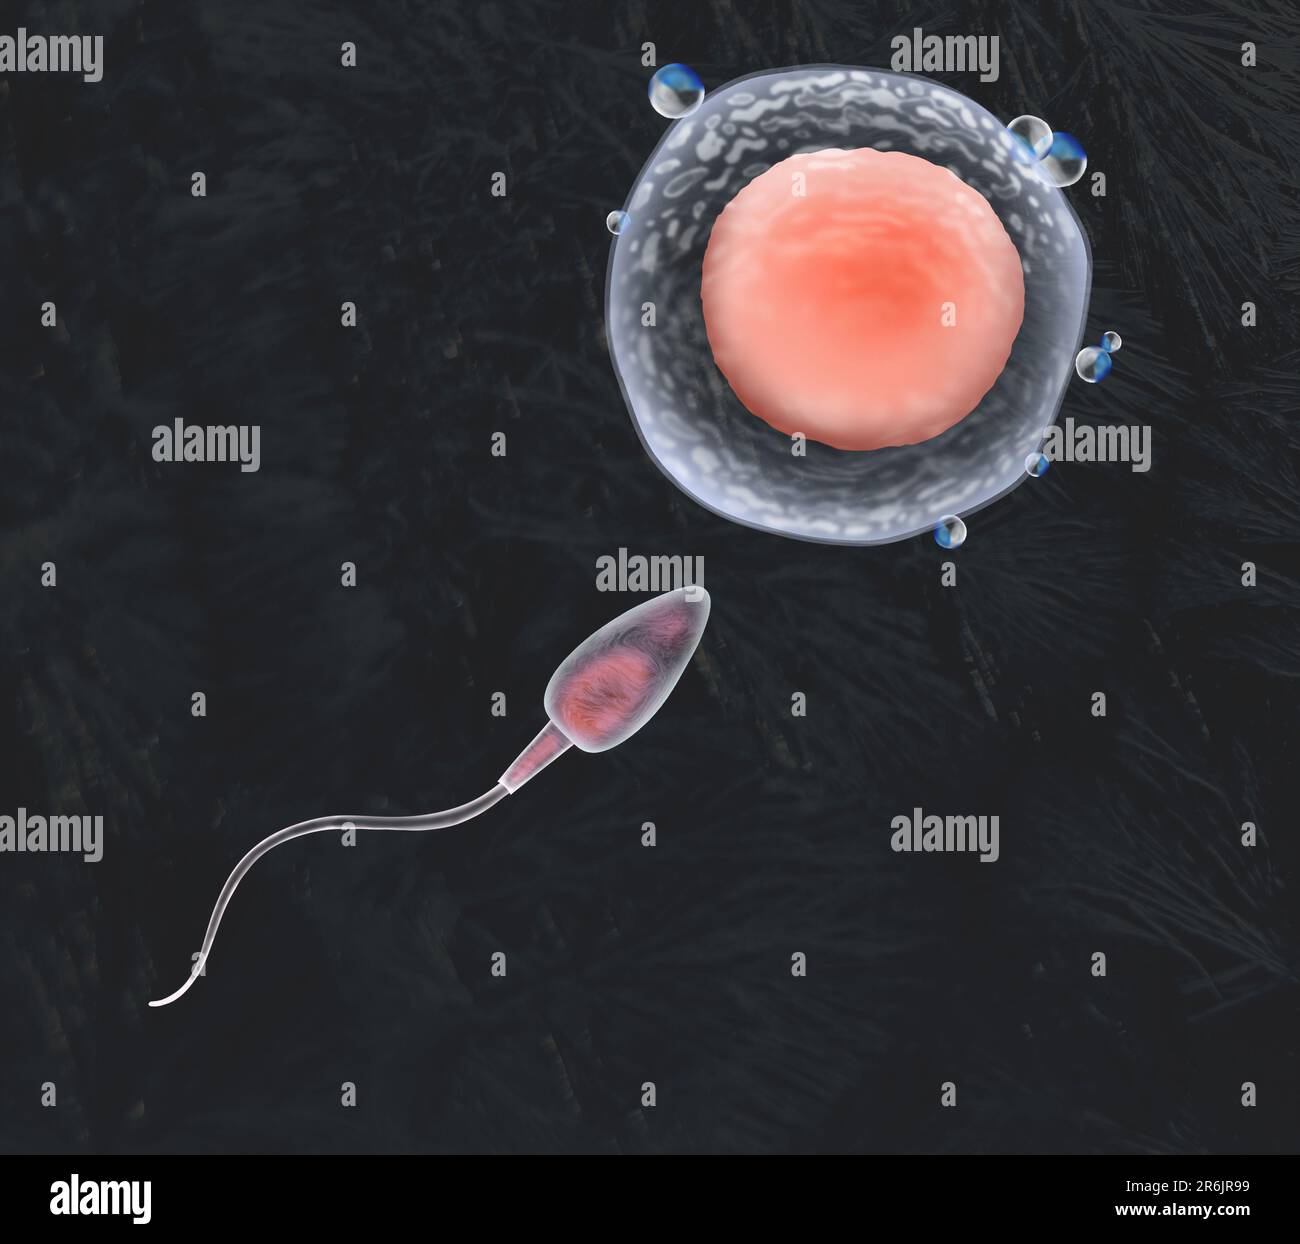 Cryopreservation of genetic material. Sperm cell and ovum on black background, frost effect Stock Photo